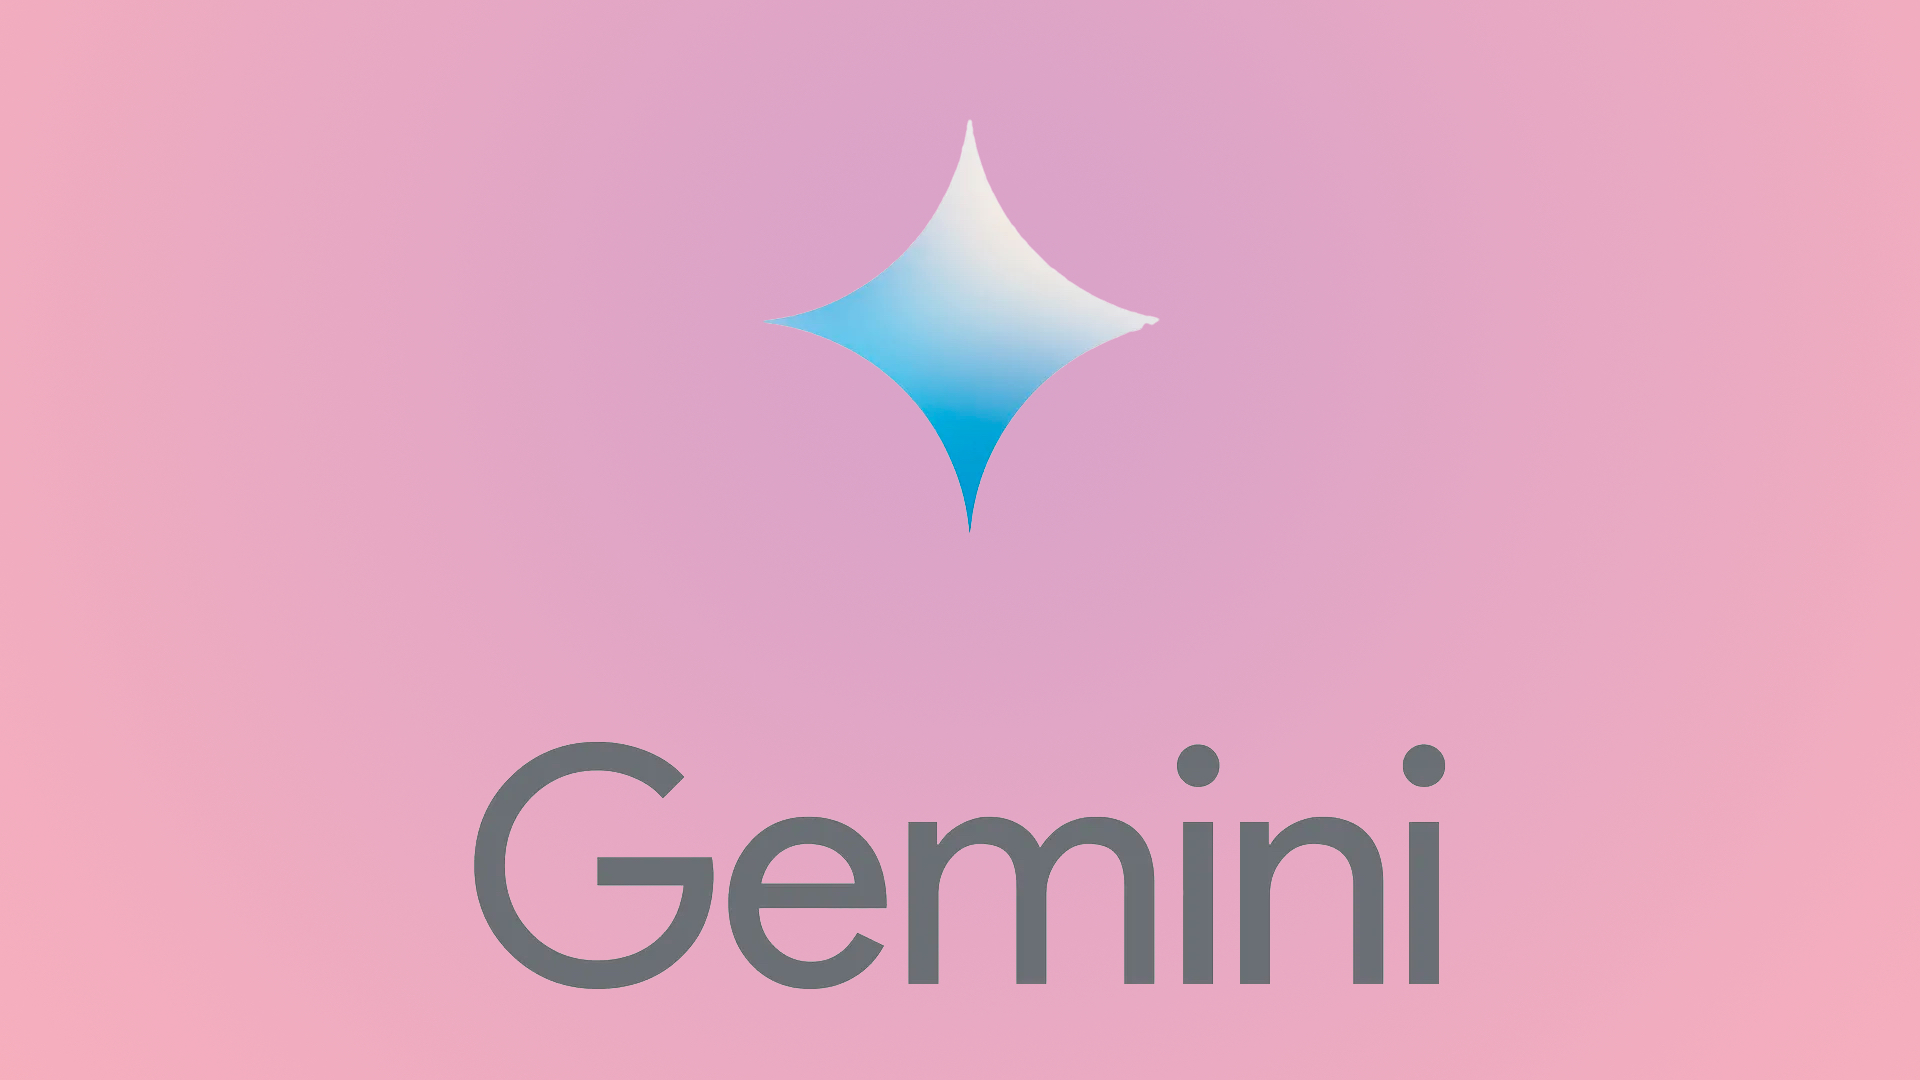 Google's Gemini AI is coming soon to Samsung and other Android phones - SamMobile